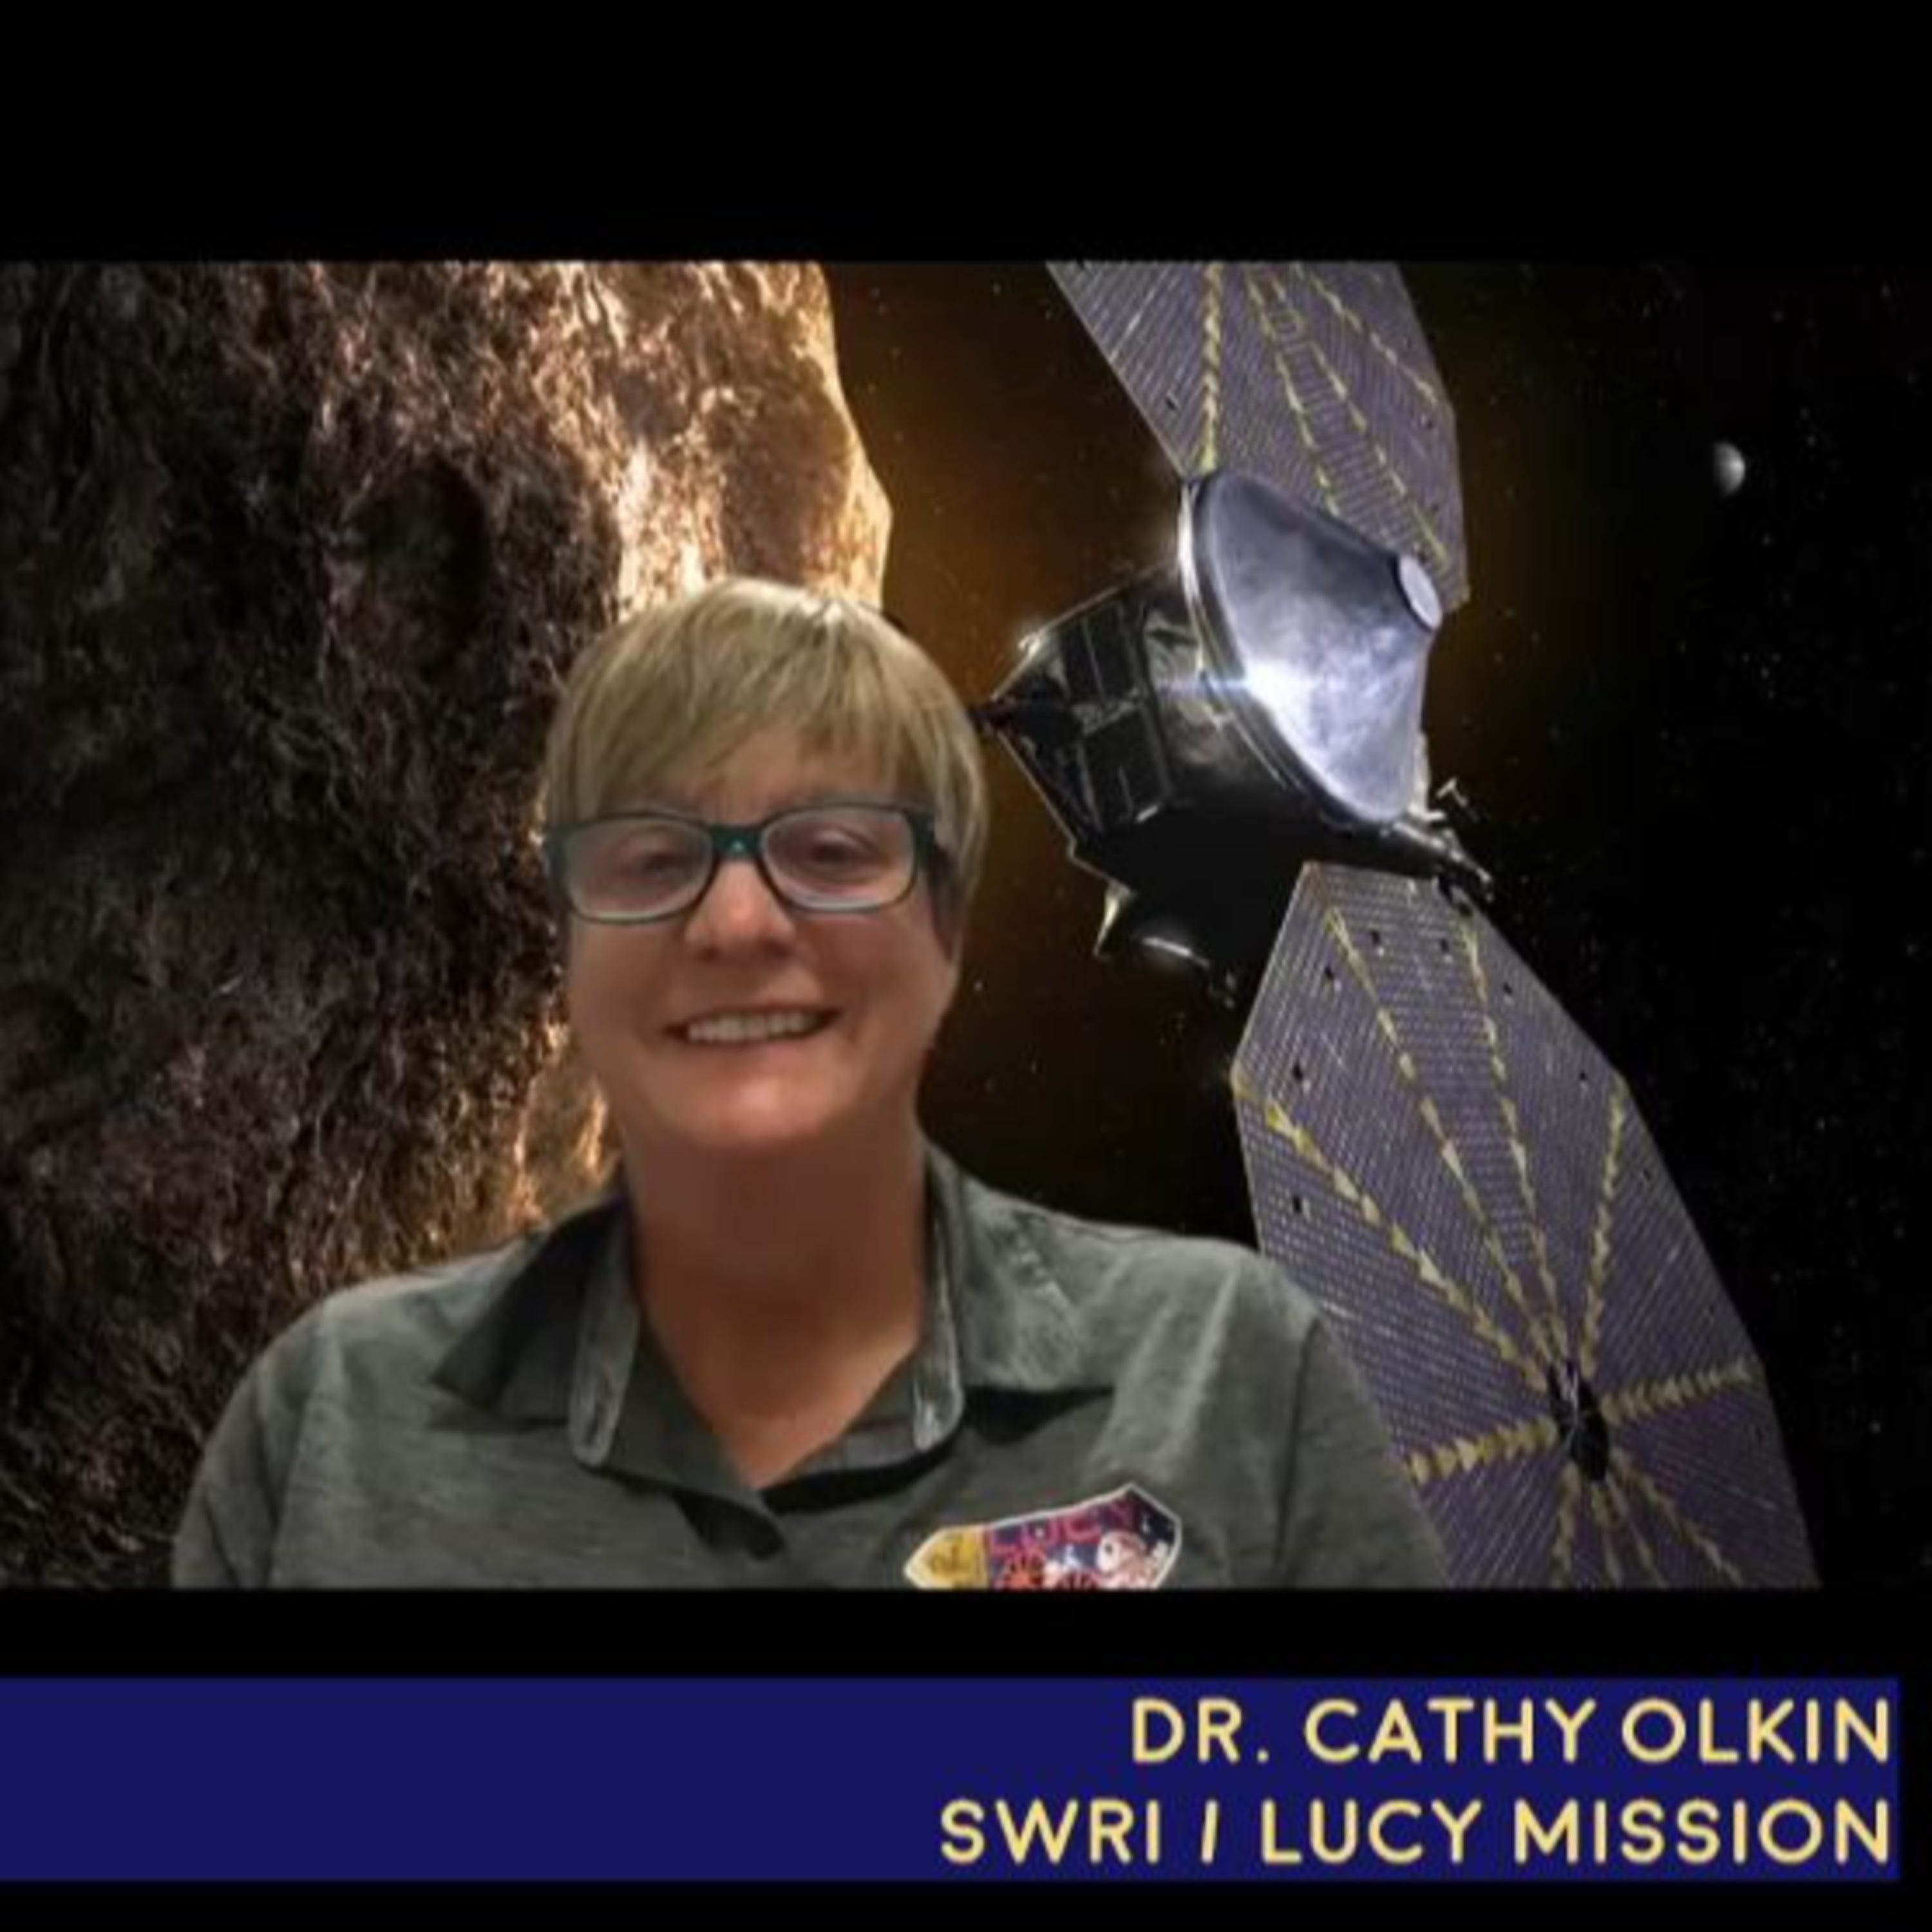 Cathy Olkin of SwRI - The Lucy mission to Jupiter's Trojan Asteroids - The Cosmic Companion 14 Sept. 2021